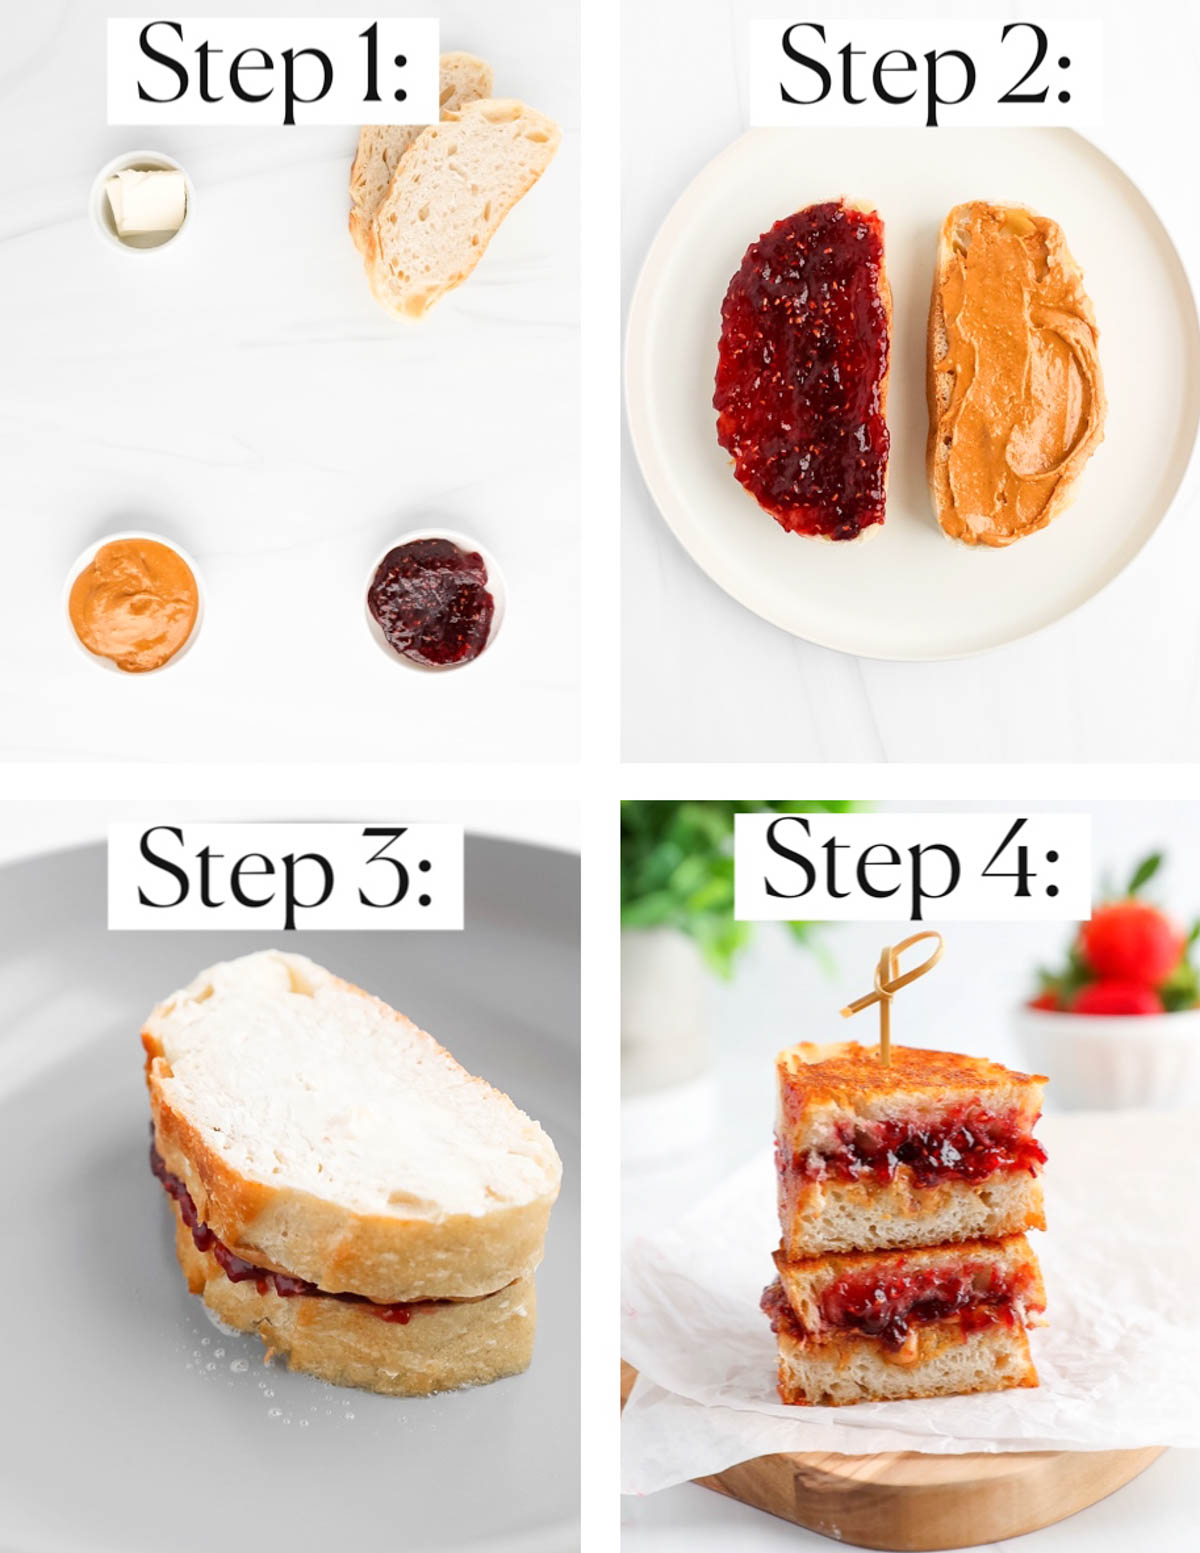 A collage of four step by step pictures. Step 1: ingredients on a white board, step 2: two slices of bread one with peanut butter on it and one with jelly on it, step 3: a peanut butter and jelly sandwich getting fried on a pan, step 4: a finished pb&j sandwich on a cutting board.